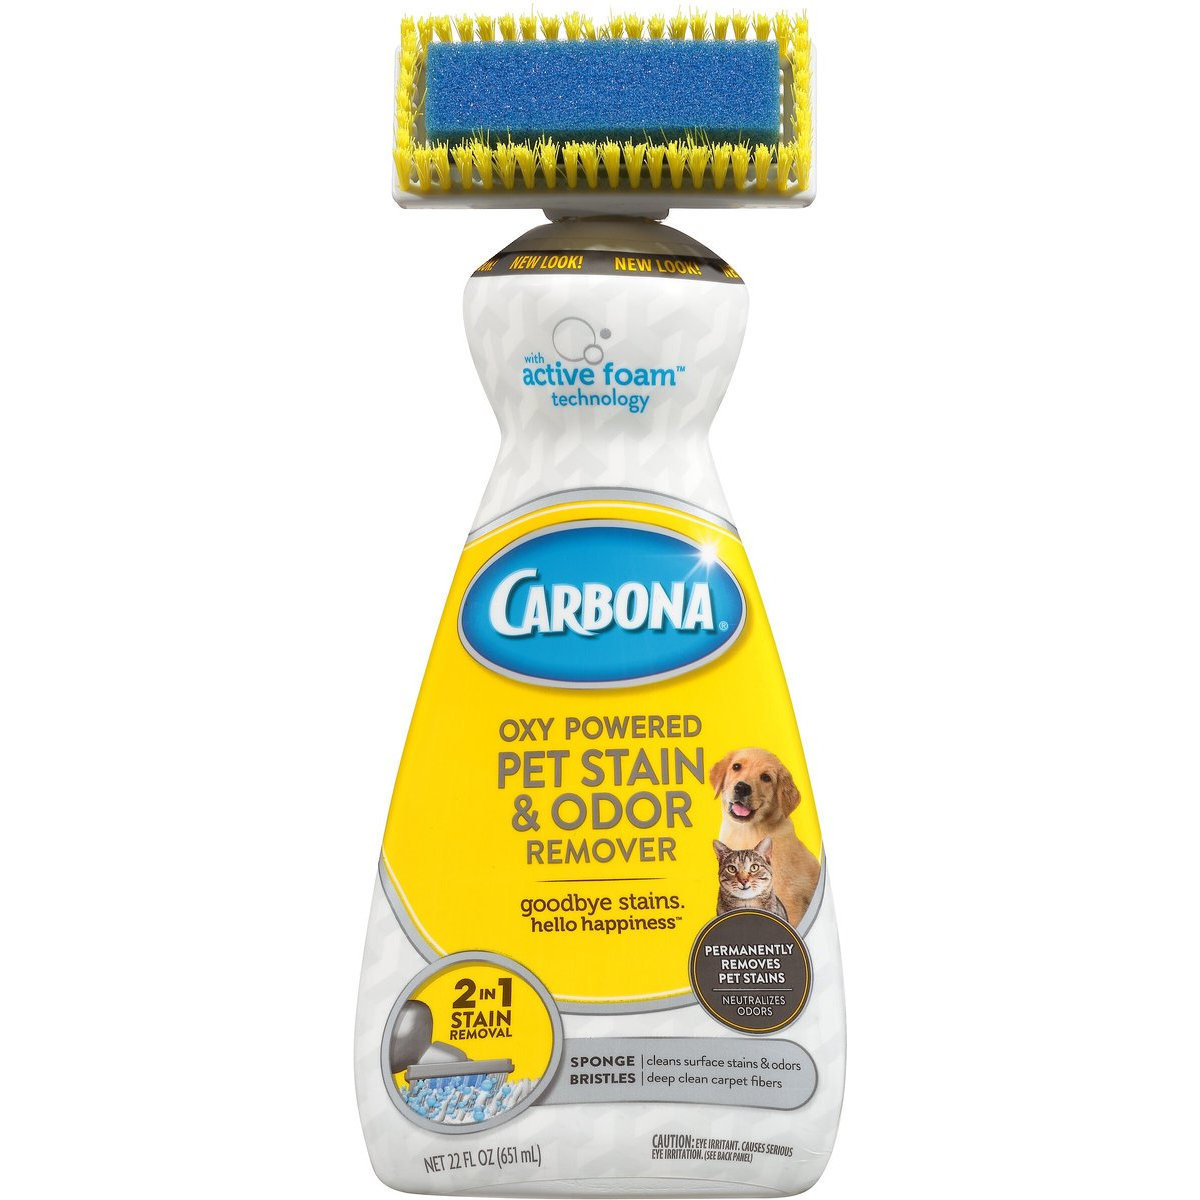 Carbona Oxy Powered Dog & Cat Stain & Odor Remover